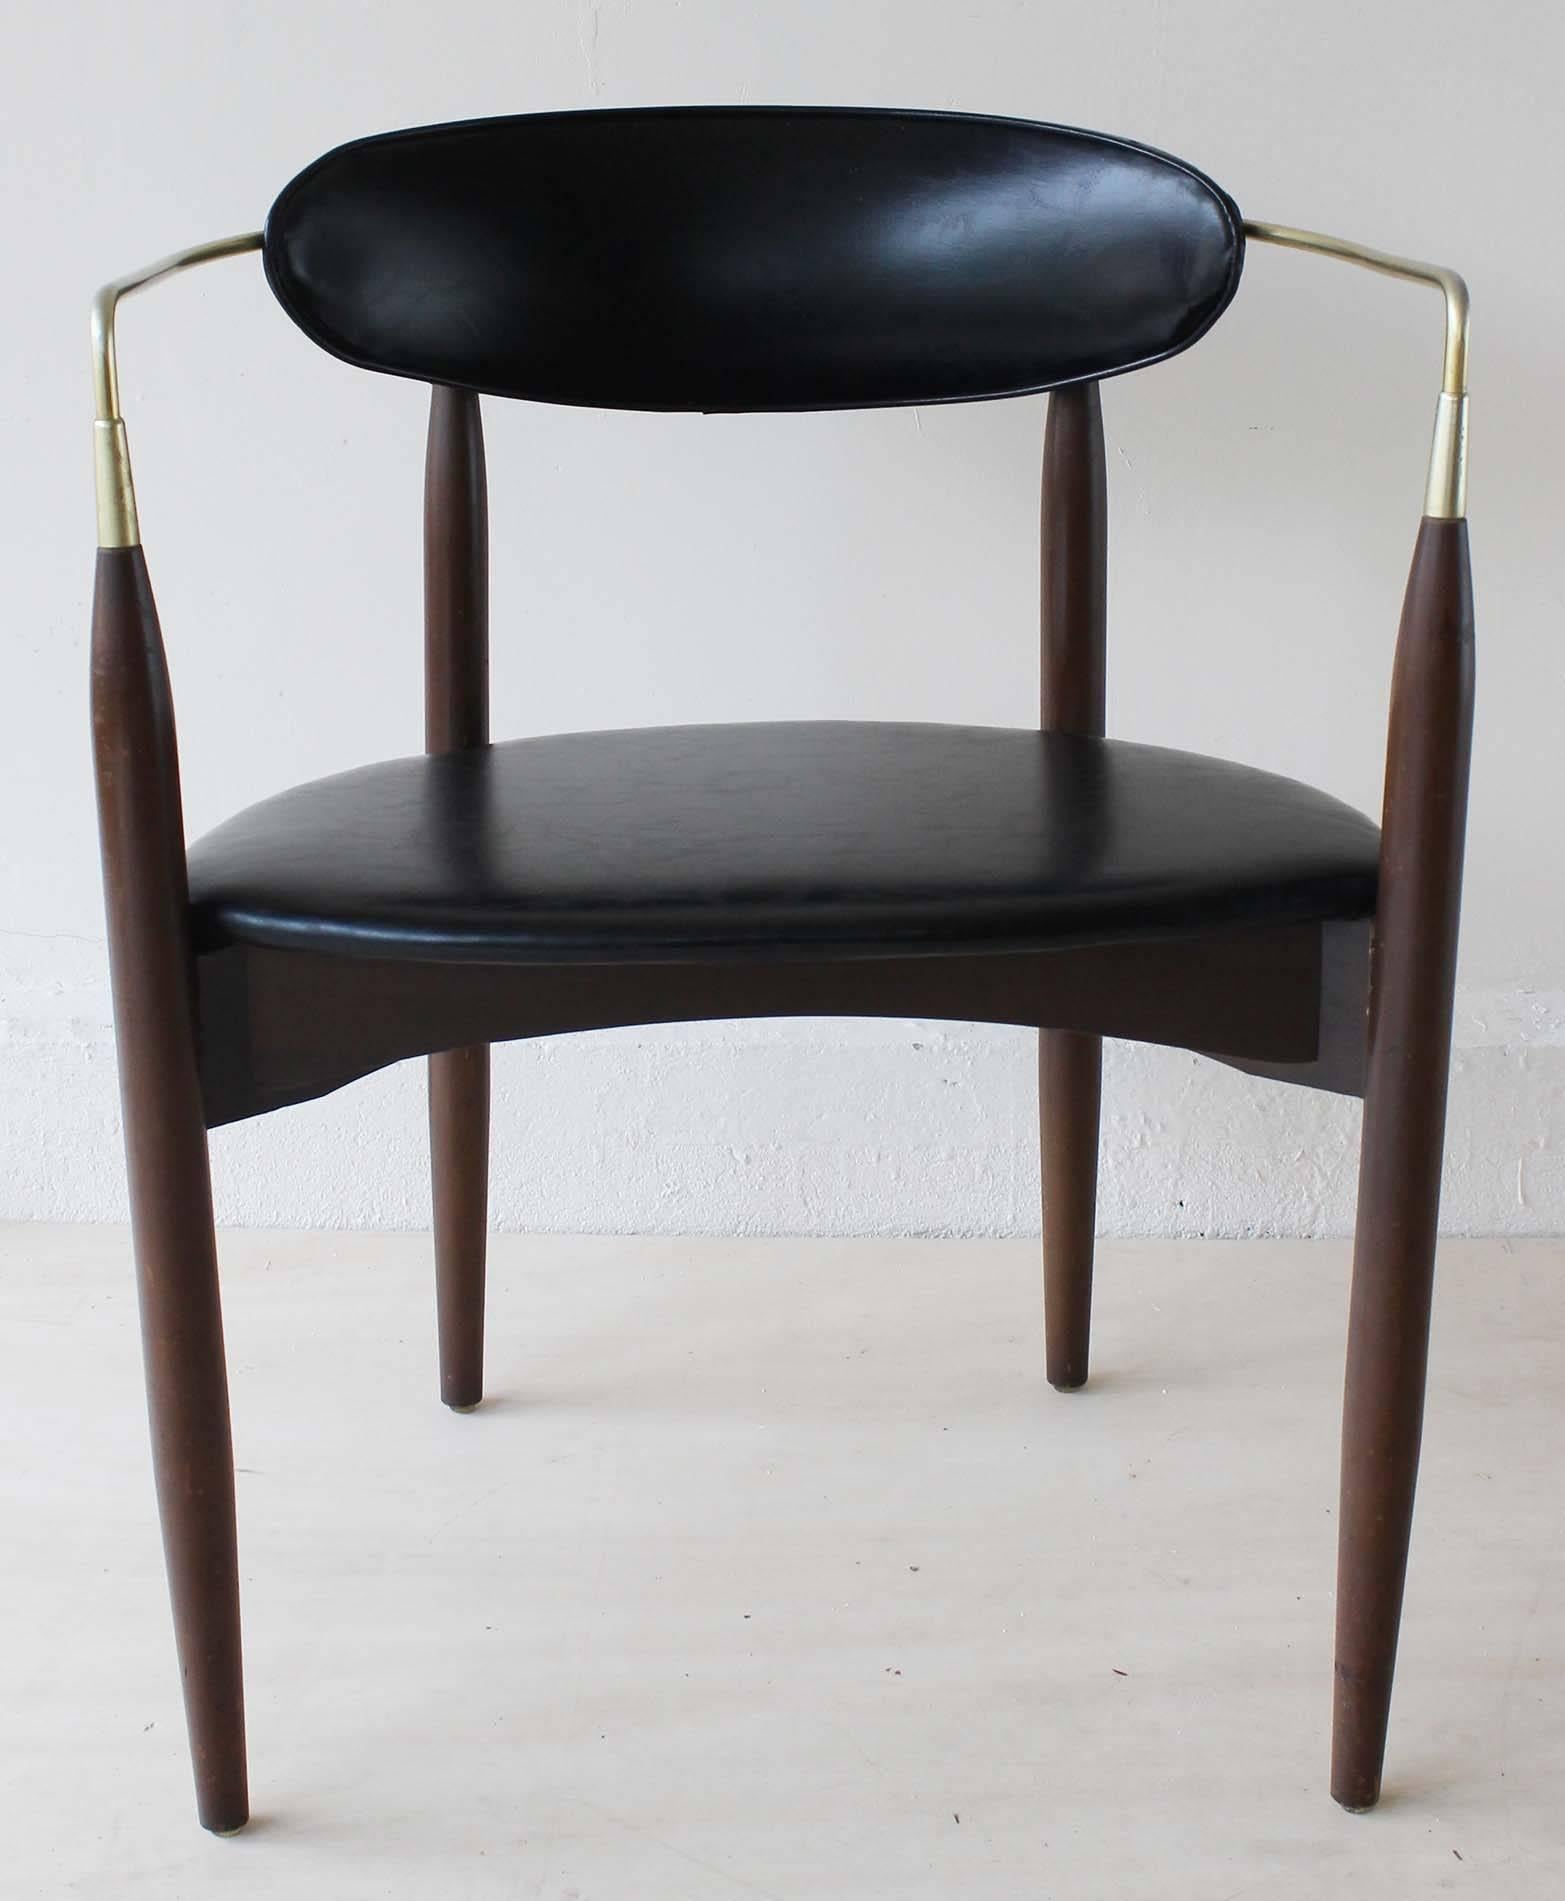 The Classic walnut and brass frame Viscount chair by Dan Johnson, circa 1950, in vinyl upholstery.